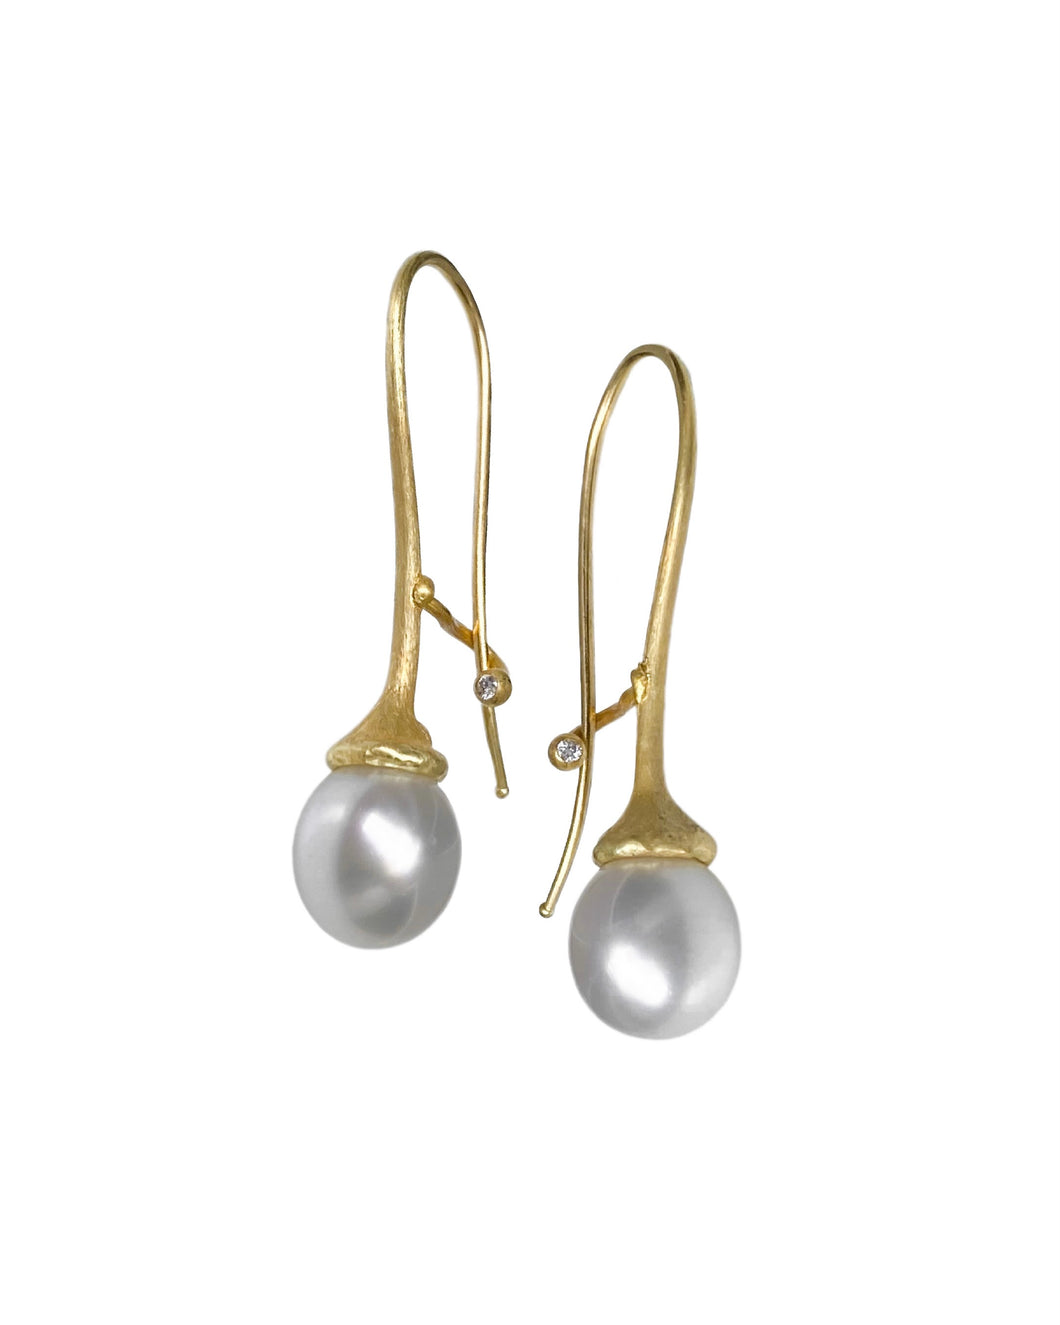 SNOWDROP EARRINGS — PEARLS AND DIAMONDS